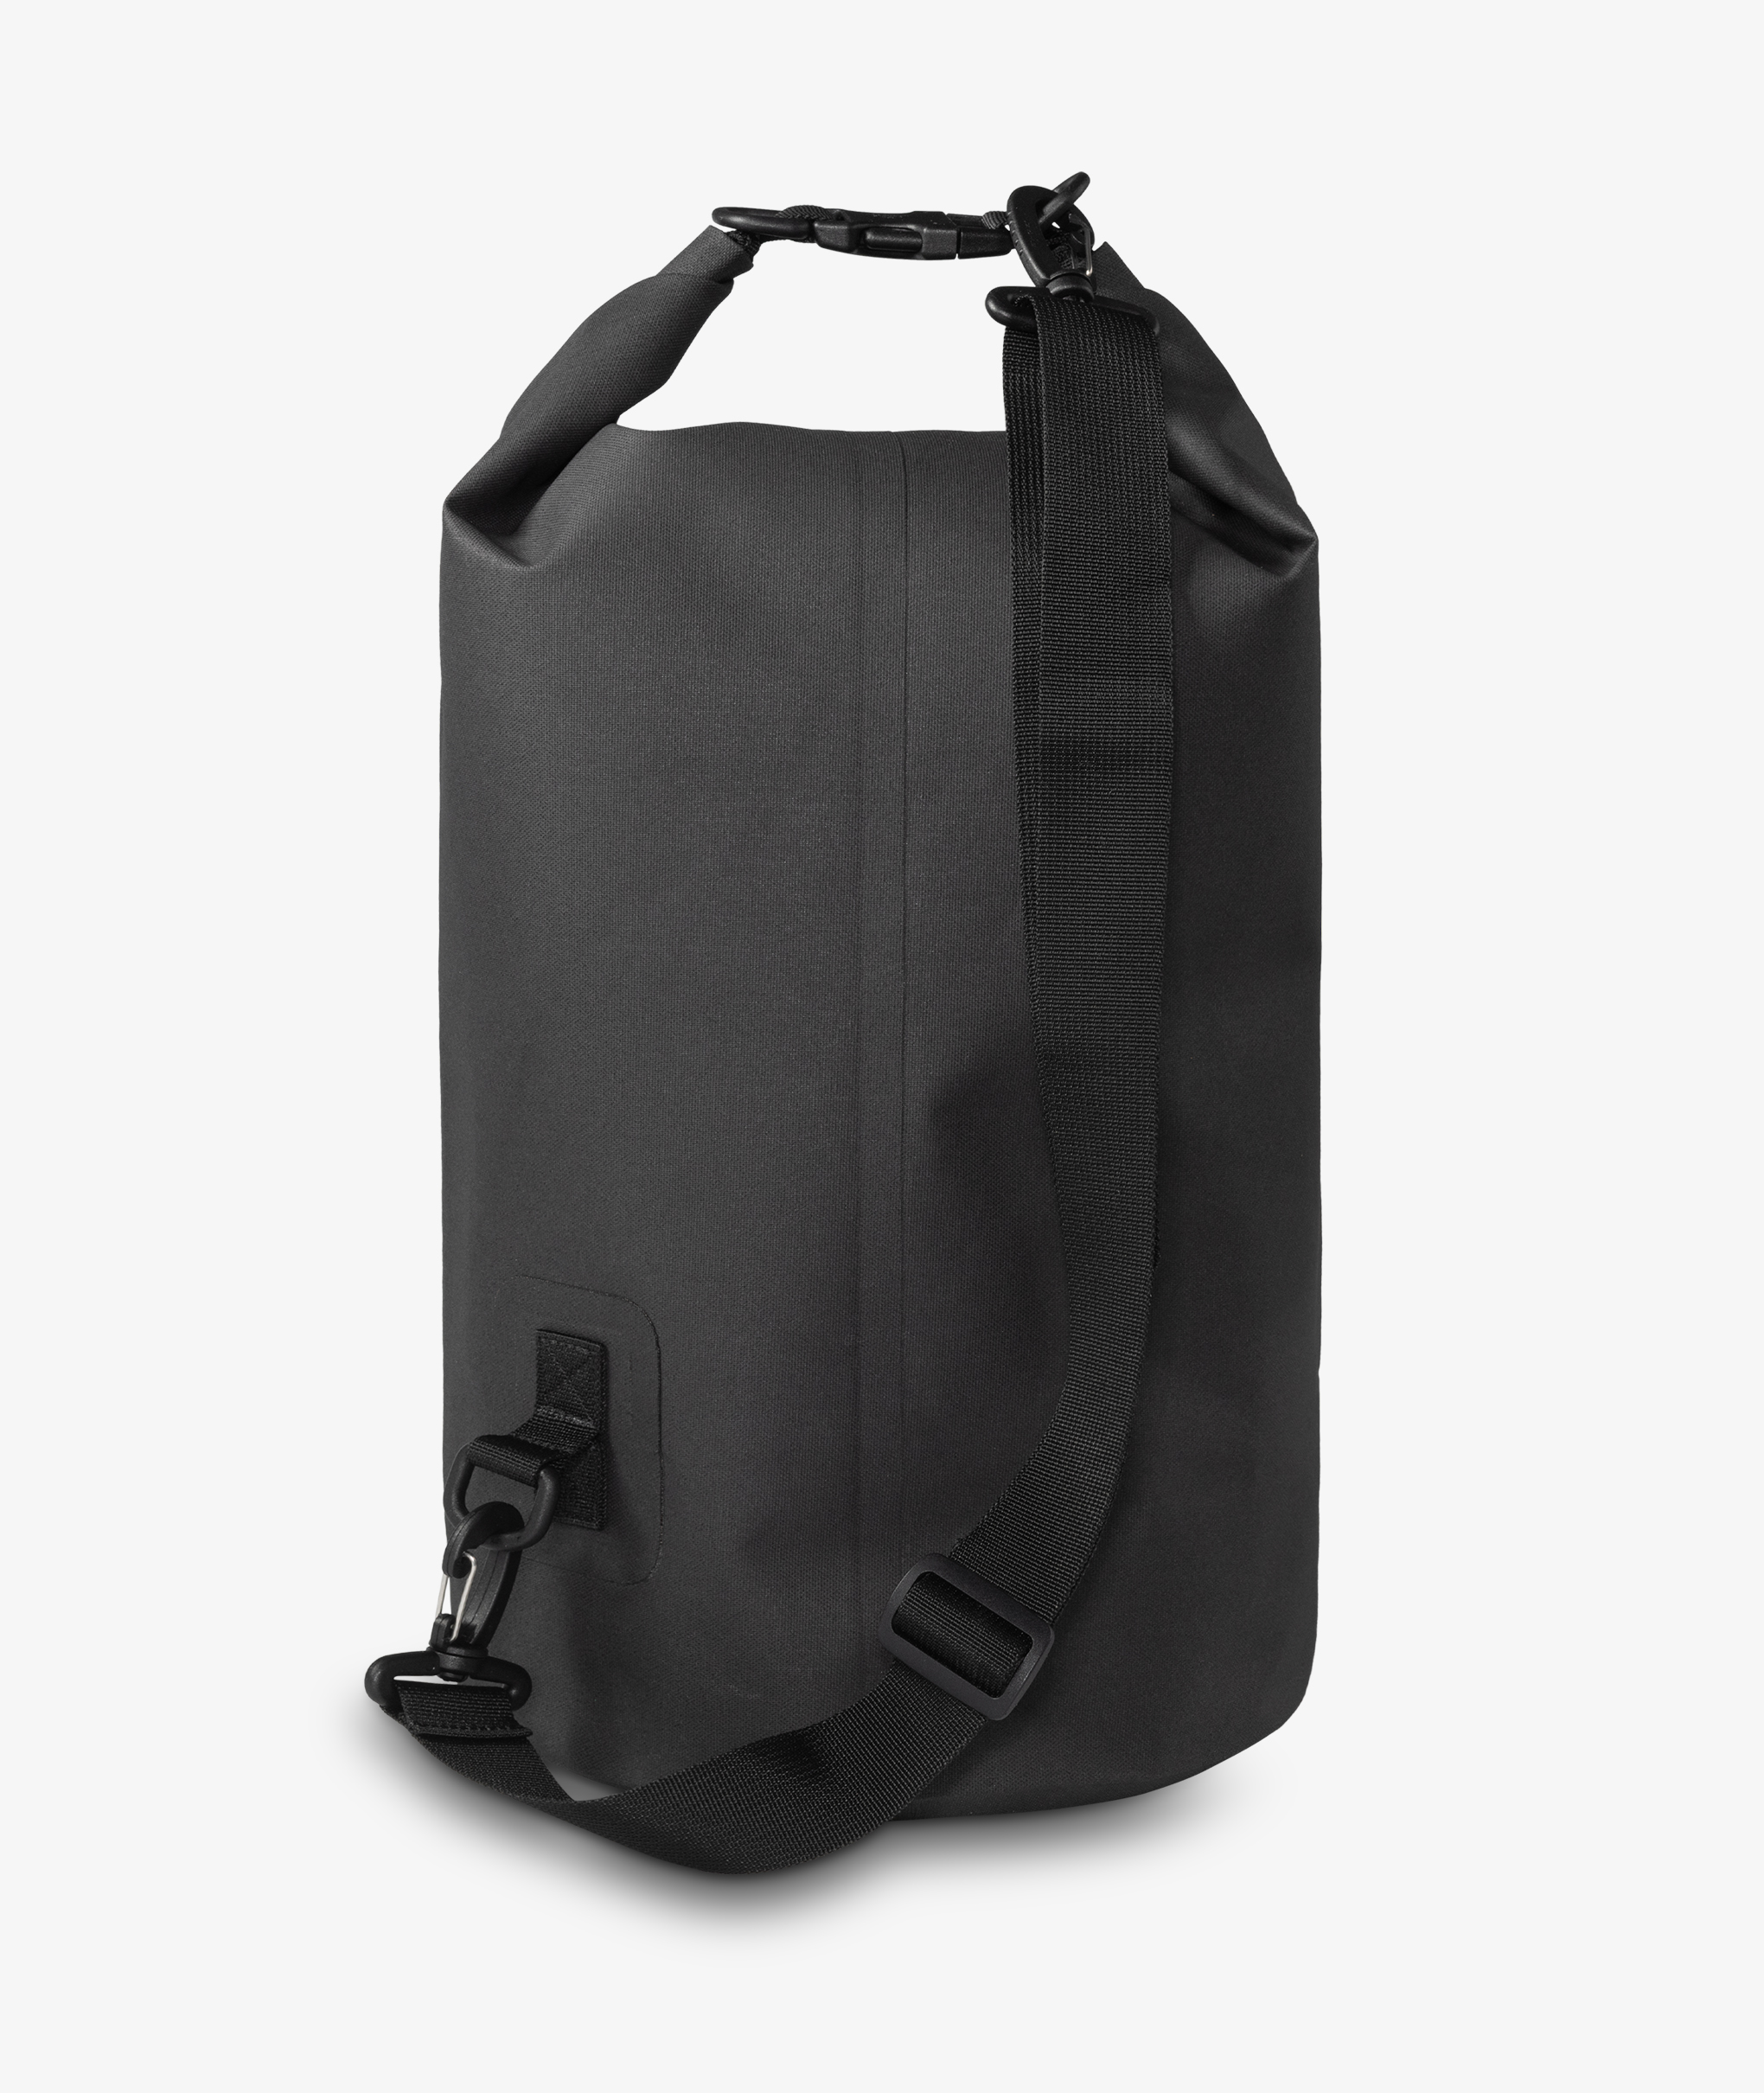 Norse Store | Shipping Worldwide - Carhartt WIP Soundscapes Dry Bag ...